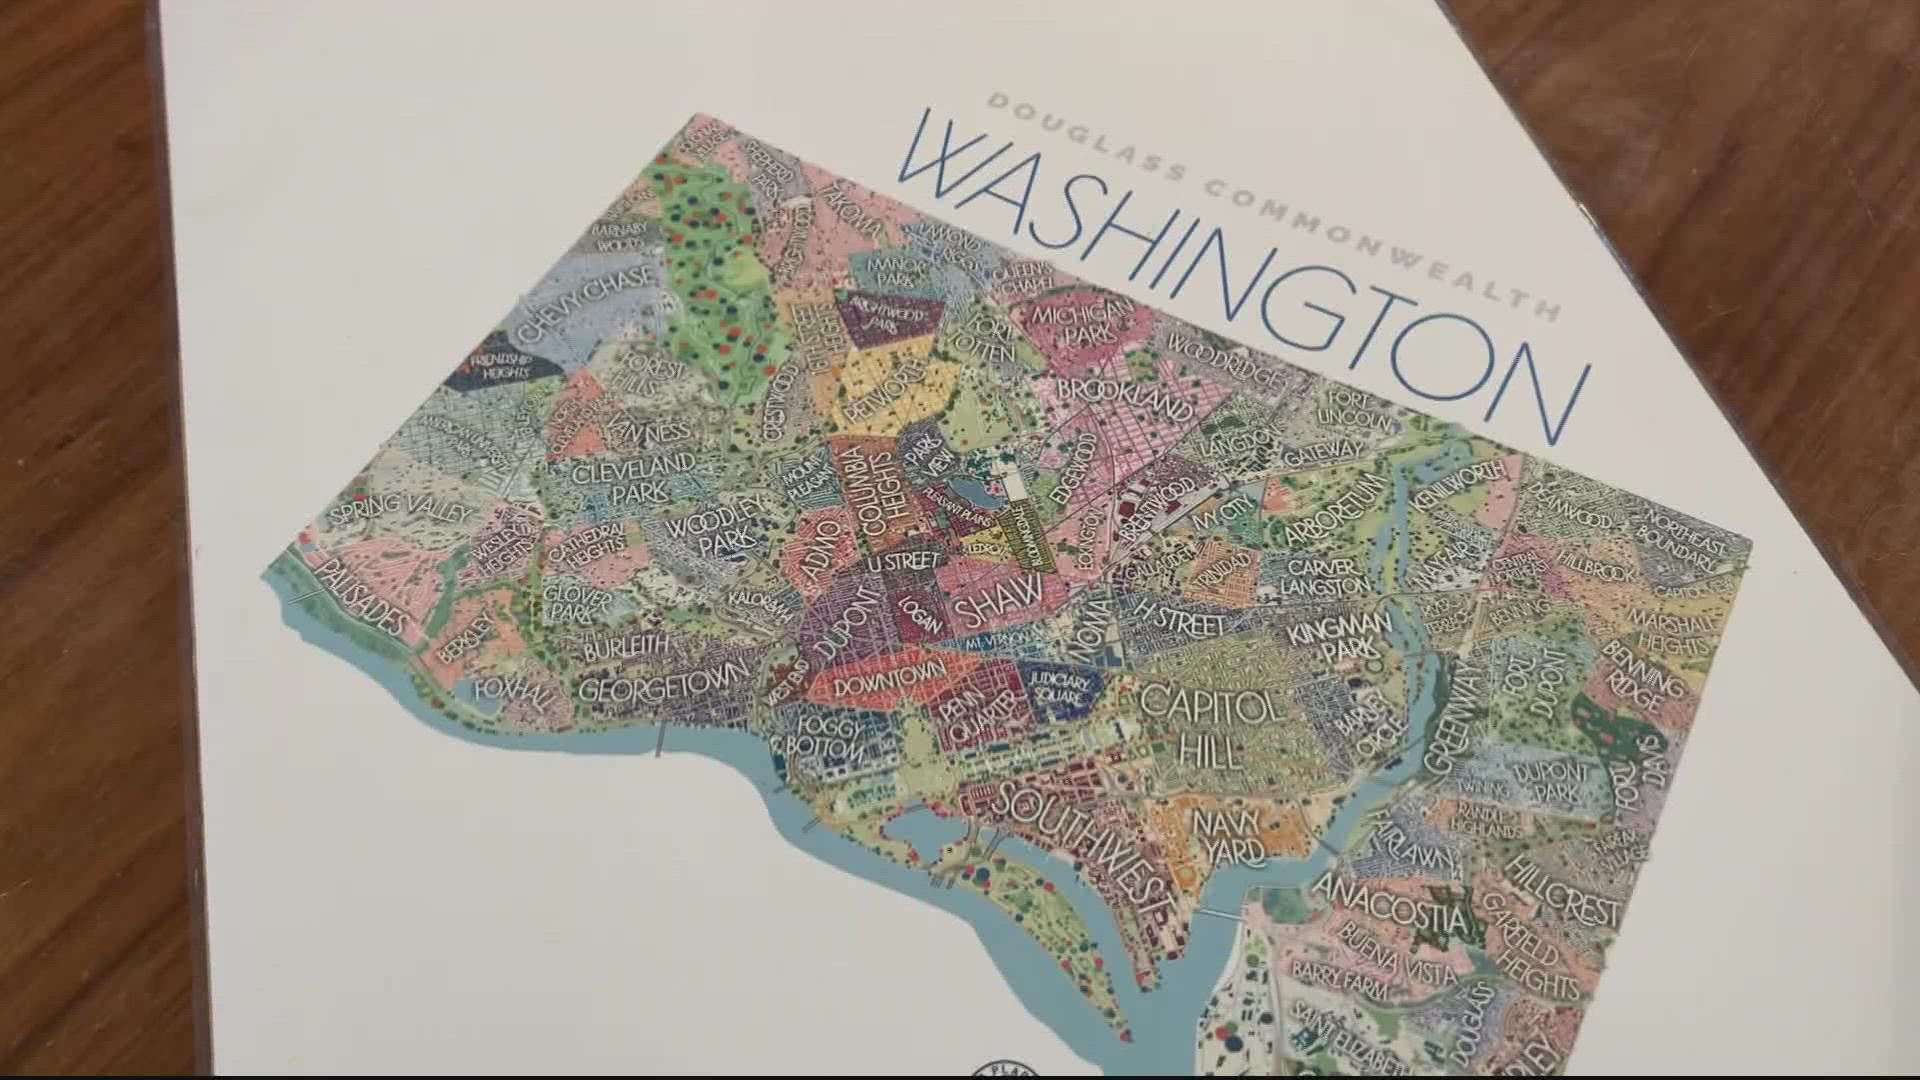 His work has been placed on postcards being sent to Maine voters in an effort to gain support for D.C. statehood.